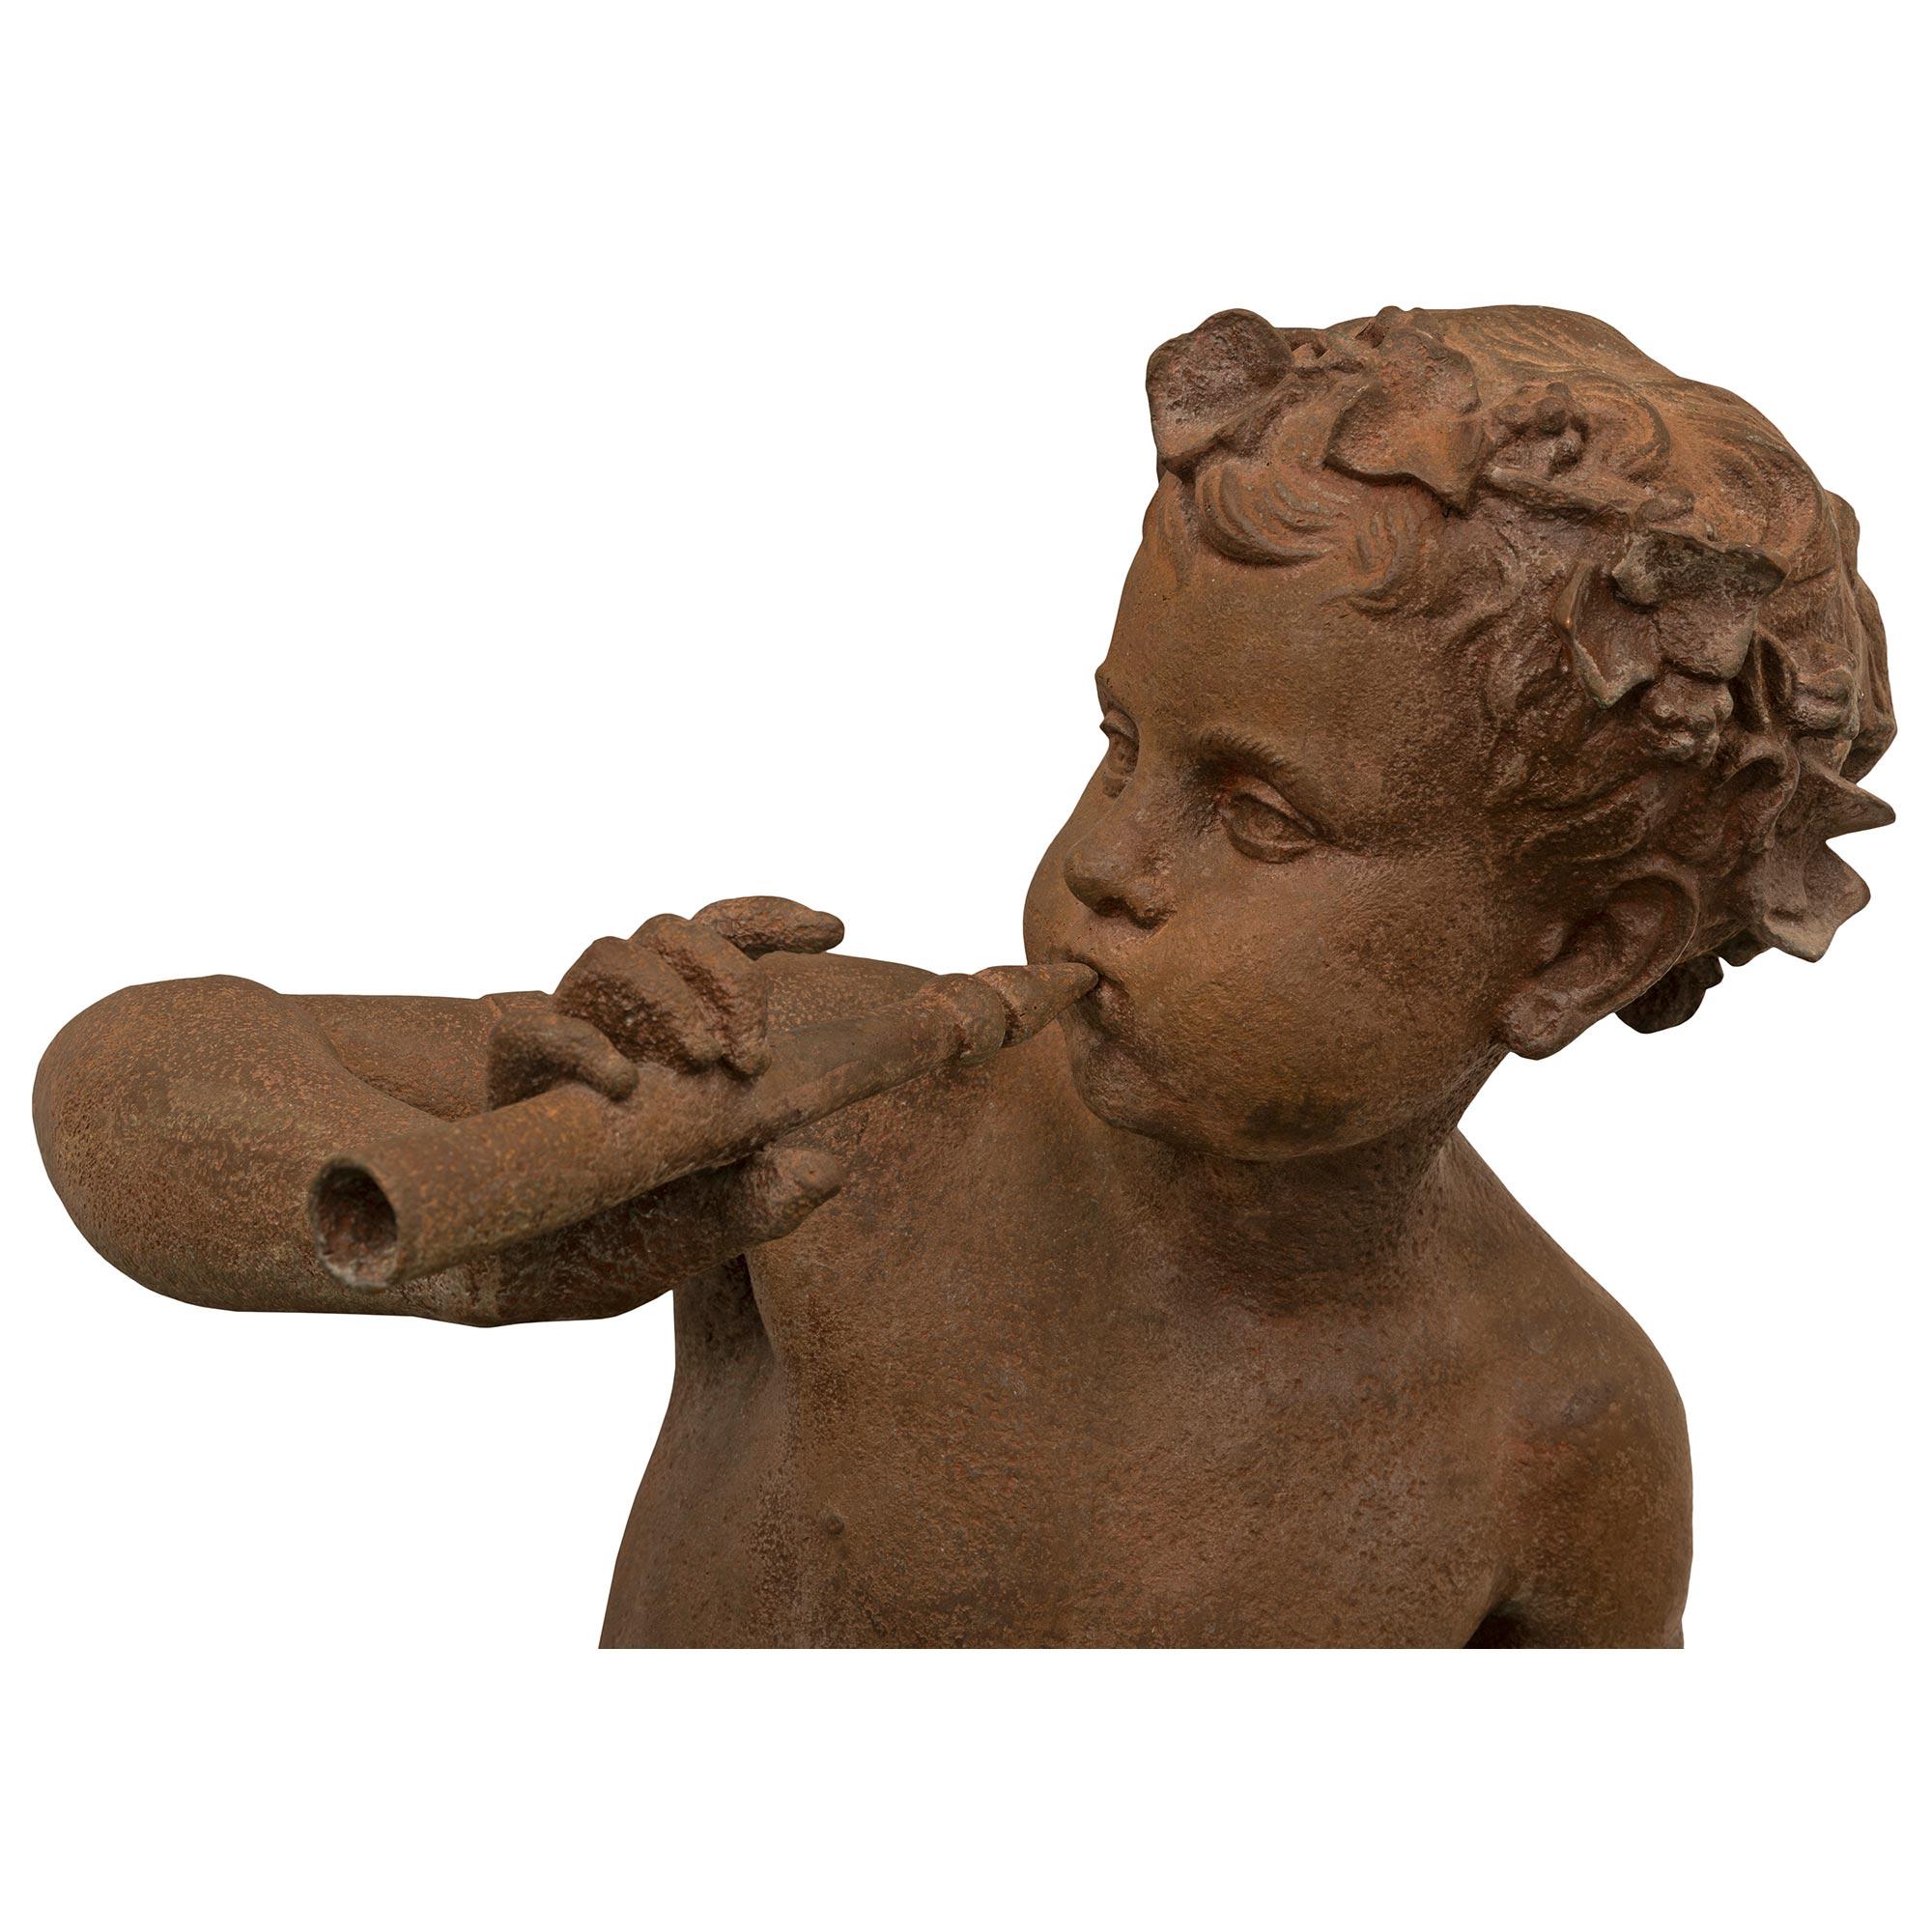 A beautiful and very high quality true pair of French 19th century cast iron statues of two young boys playing flutes signed A. Durenne sommevoire. Each statue is raised by a circular base and depicts charming young boys joyously dancing and